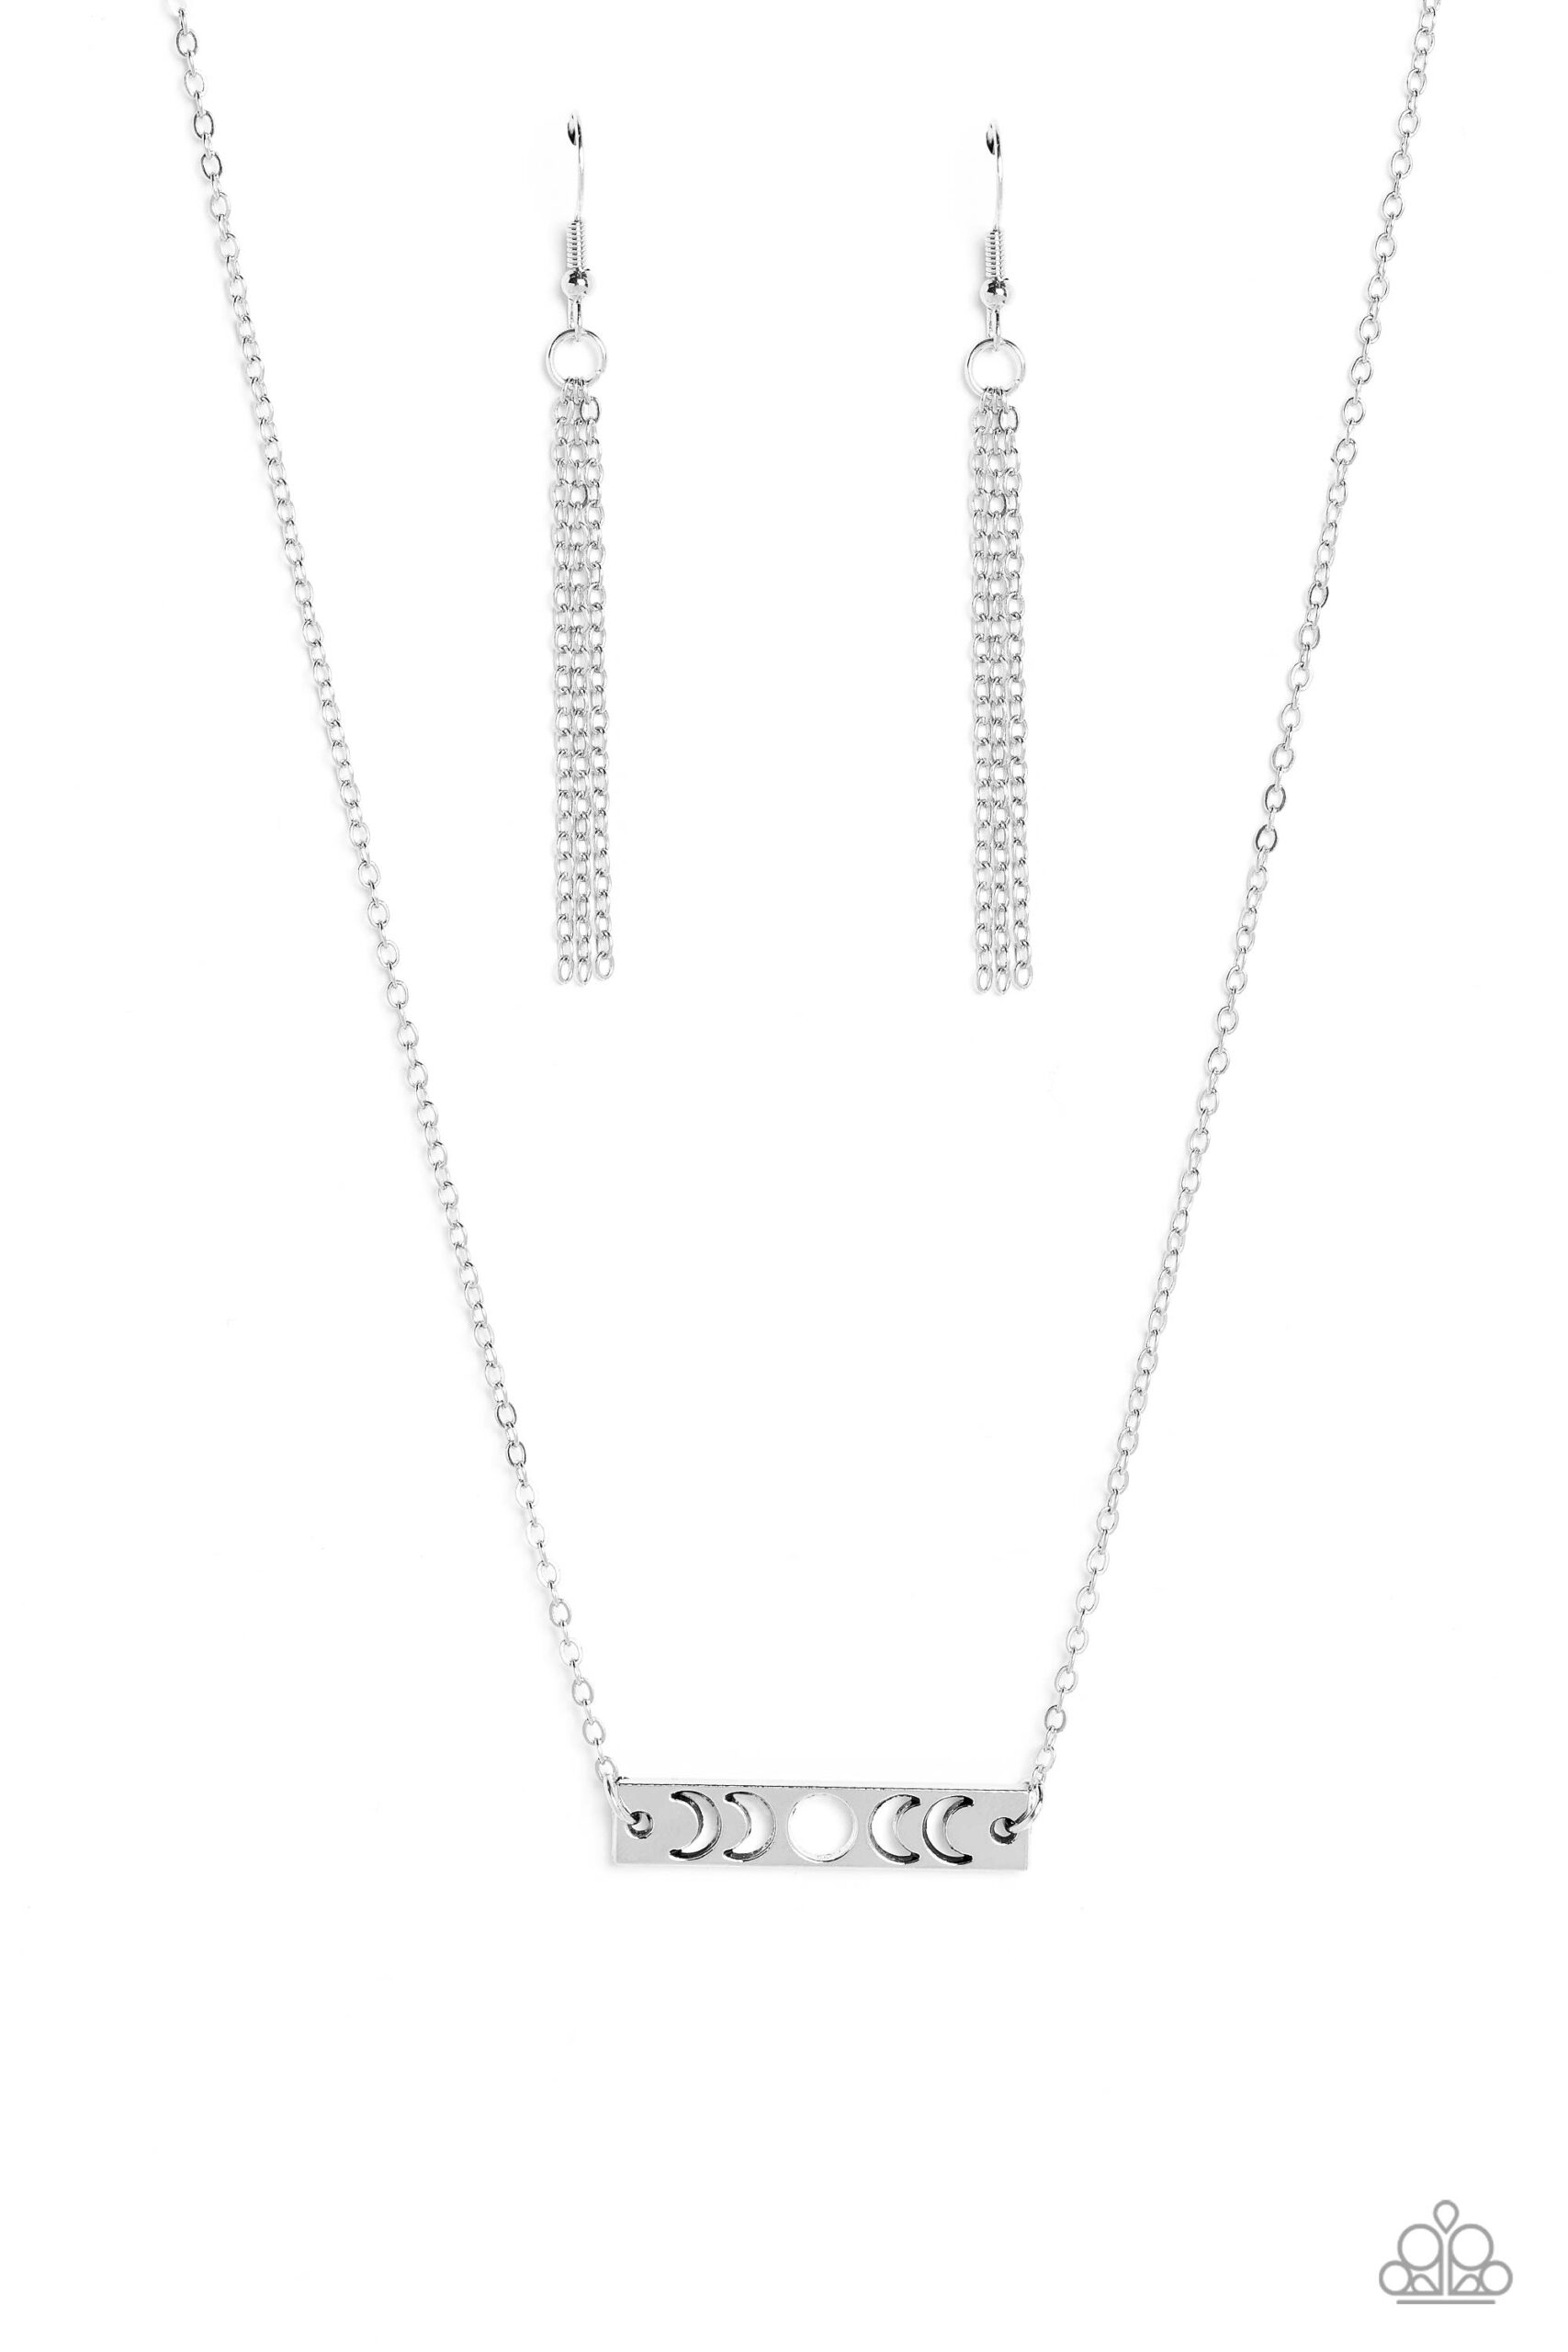 Necklace - LUNAR or Later - Silver